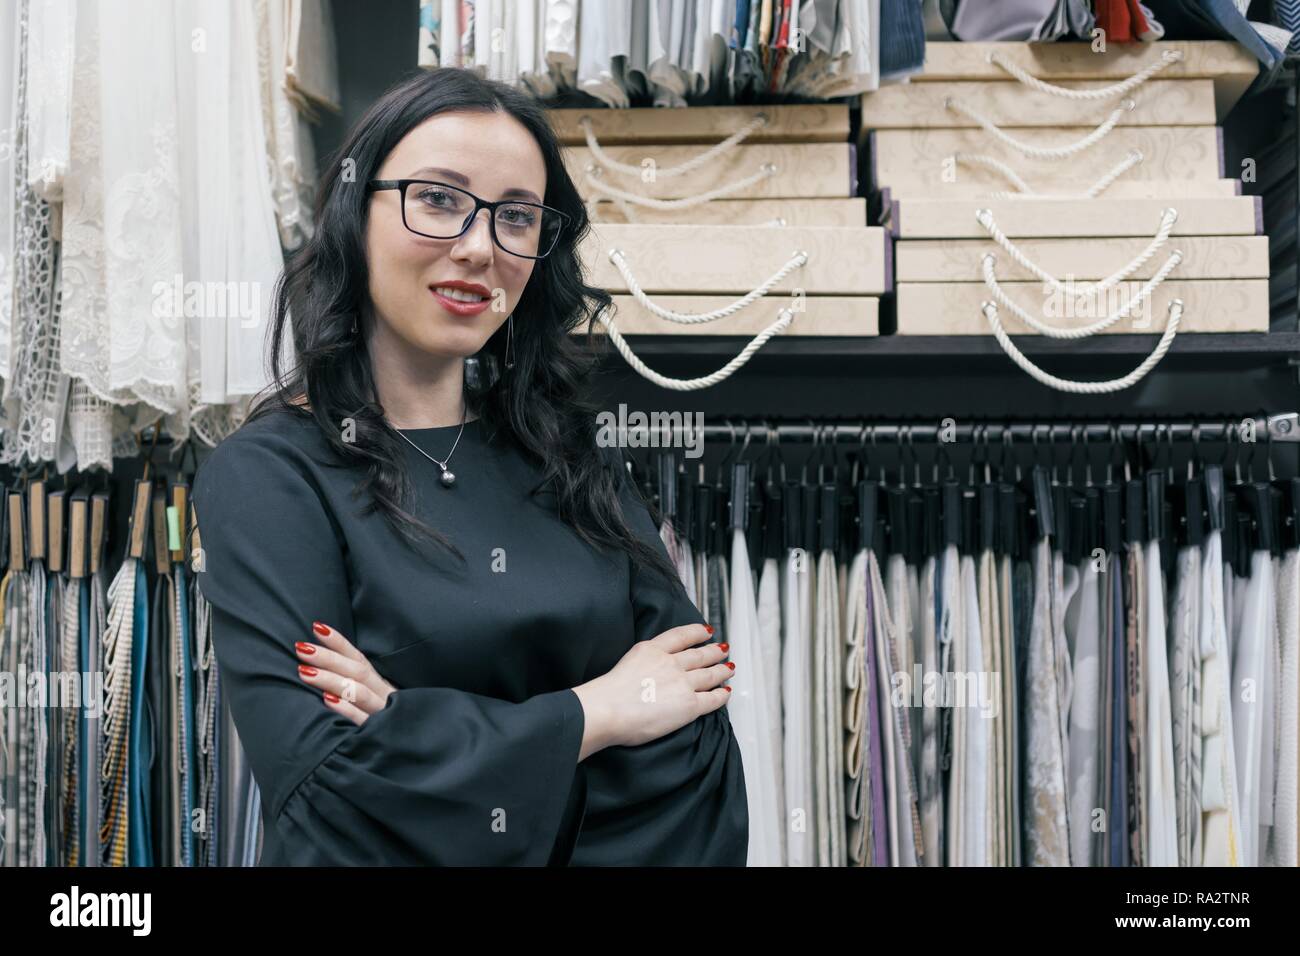 Confident businesswomen owner of a small business fabric store, woman with glasses smiling with folded hands at the workplace, background fabric sampl Stock Photo